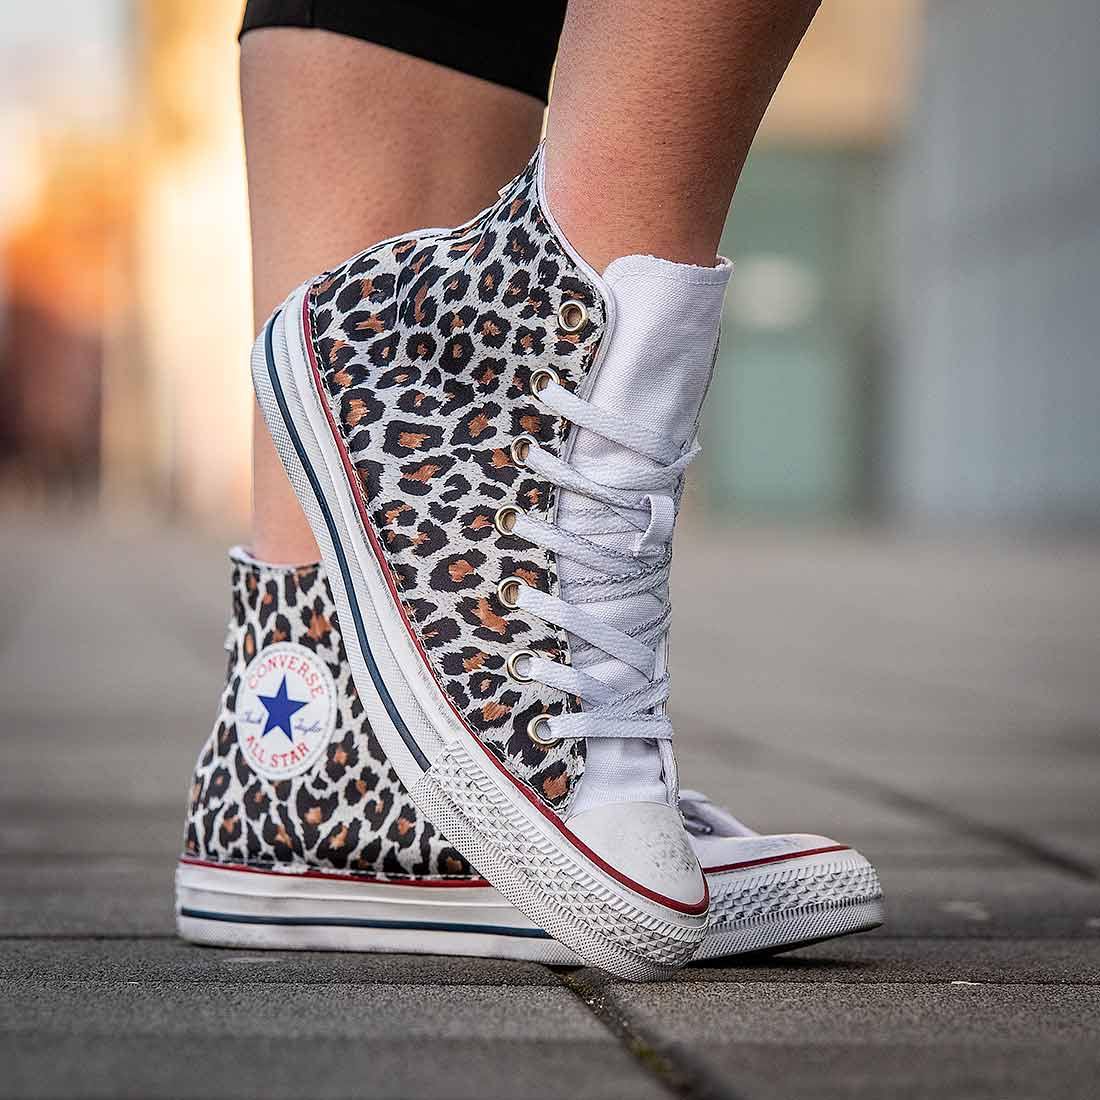 Scarpe-All-Star-Personalizzate-Animalier-Converse-Leopardate-Alte-Maculate-Racoon-LAB